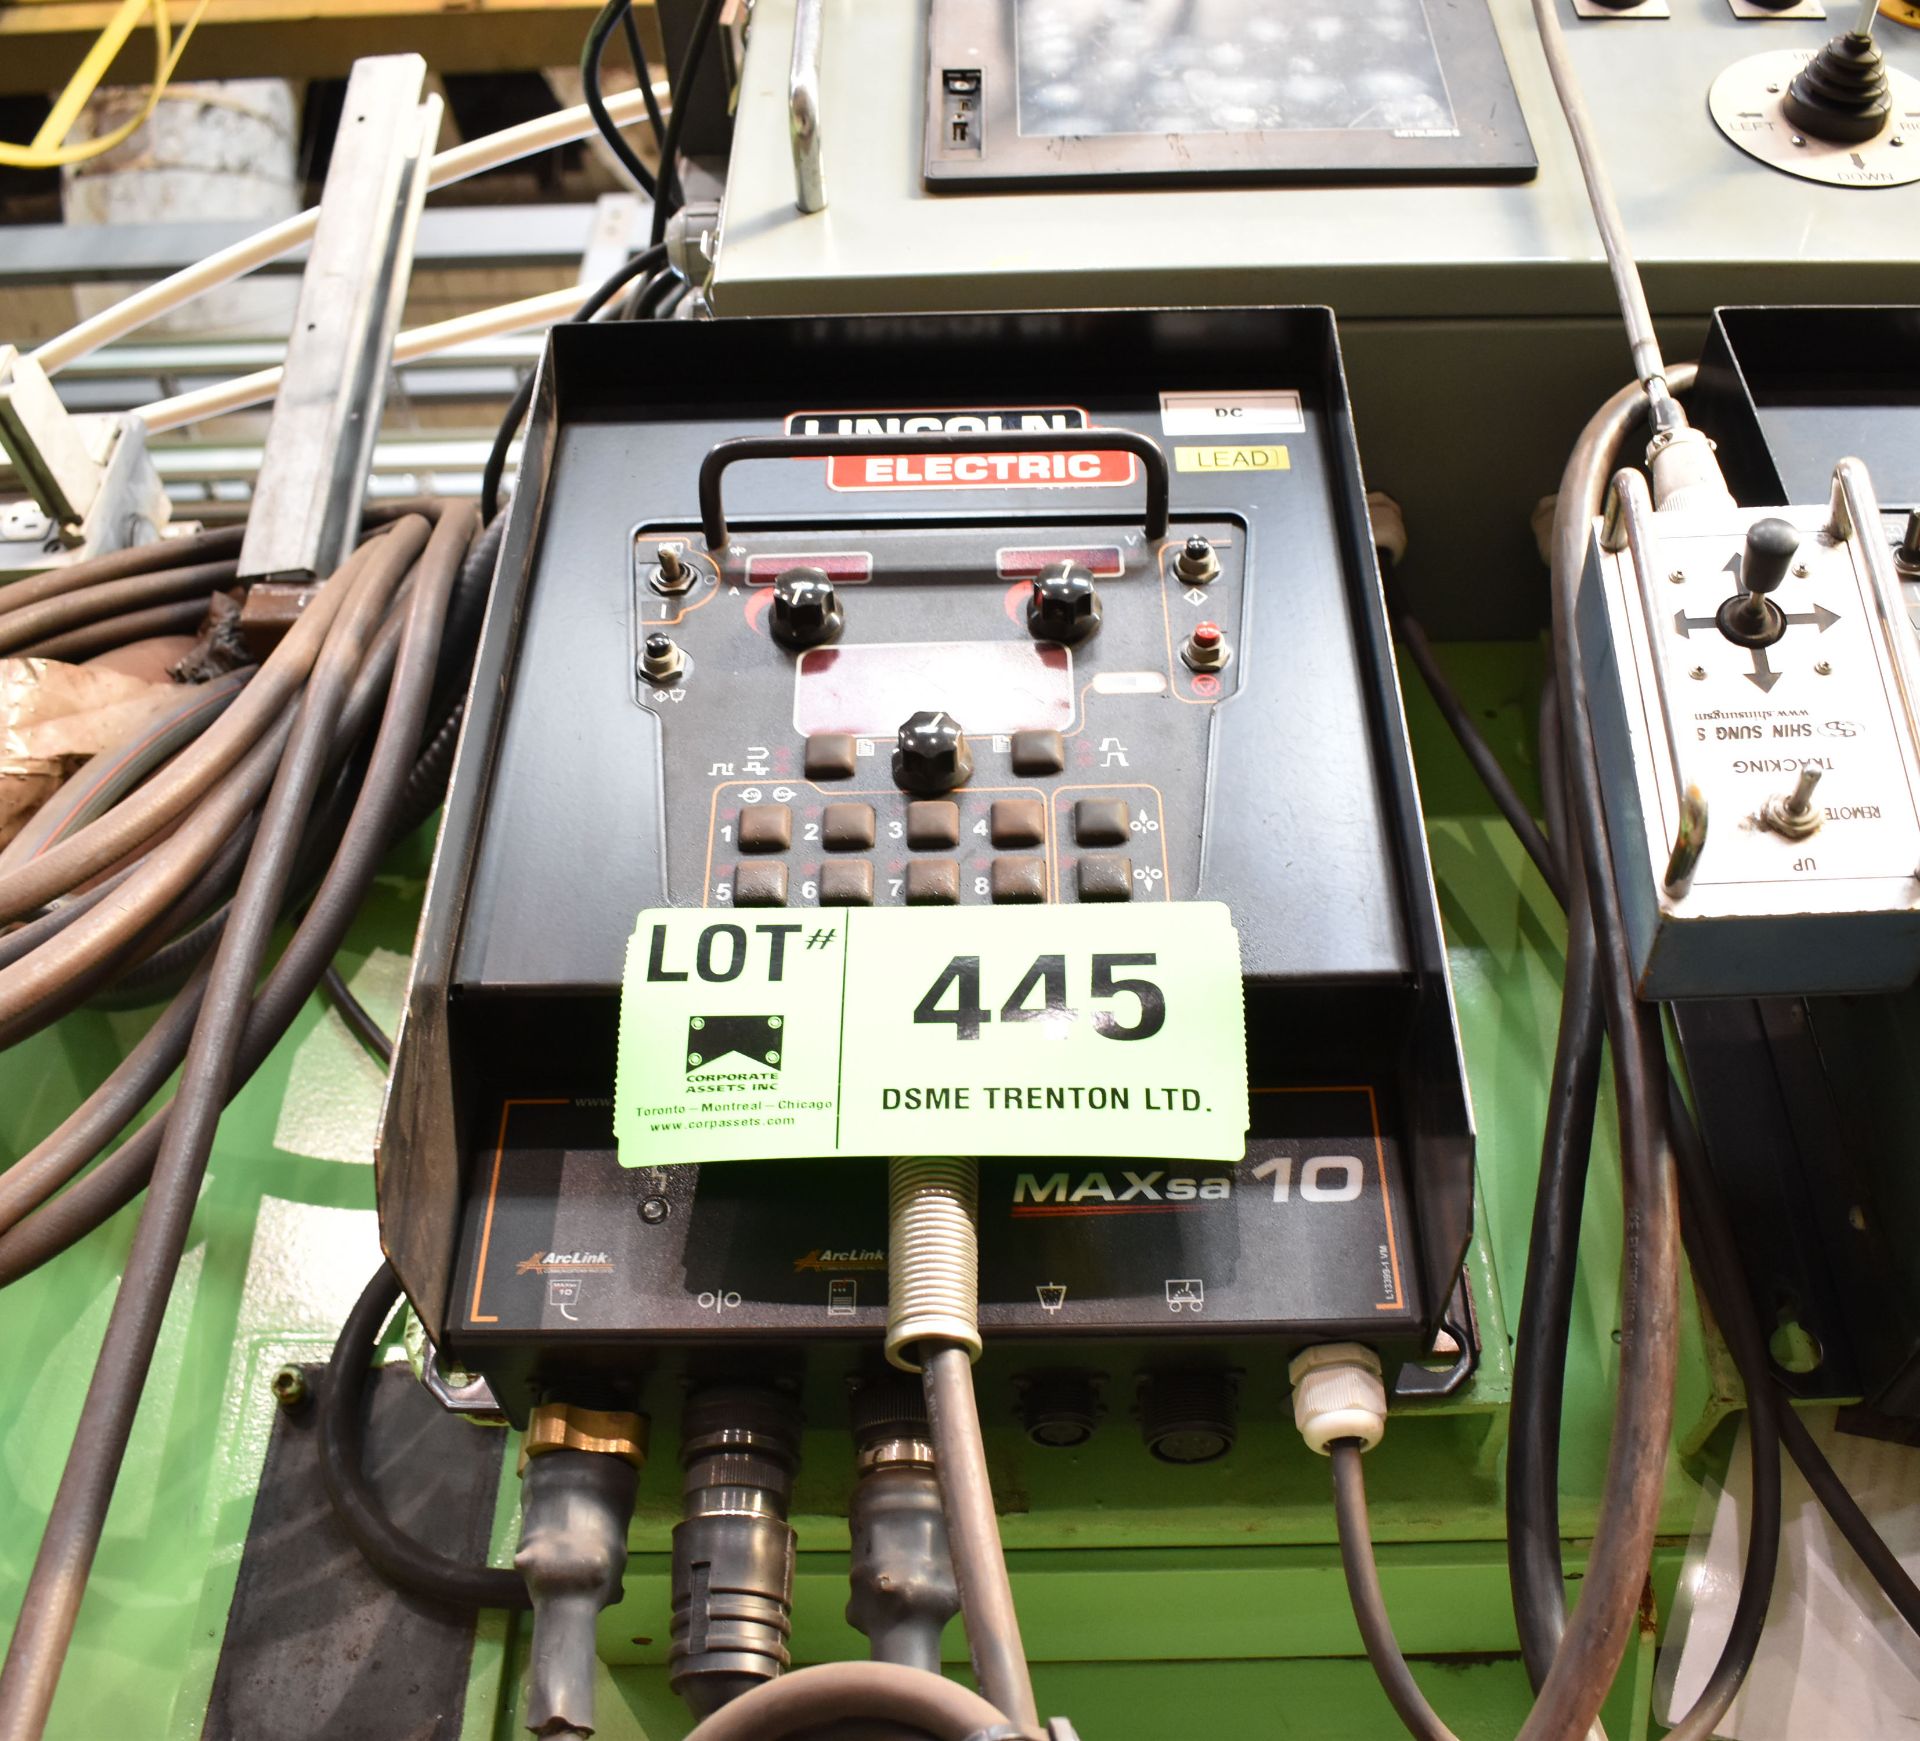 JONGHAP - LINCOLN ELECTRIC GL-04 (2011) MA-75-03 CIRC/IN SUB ARC WELDING SYSTEM CONSISTING OF - Image 6 of 11